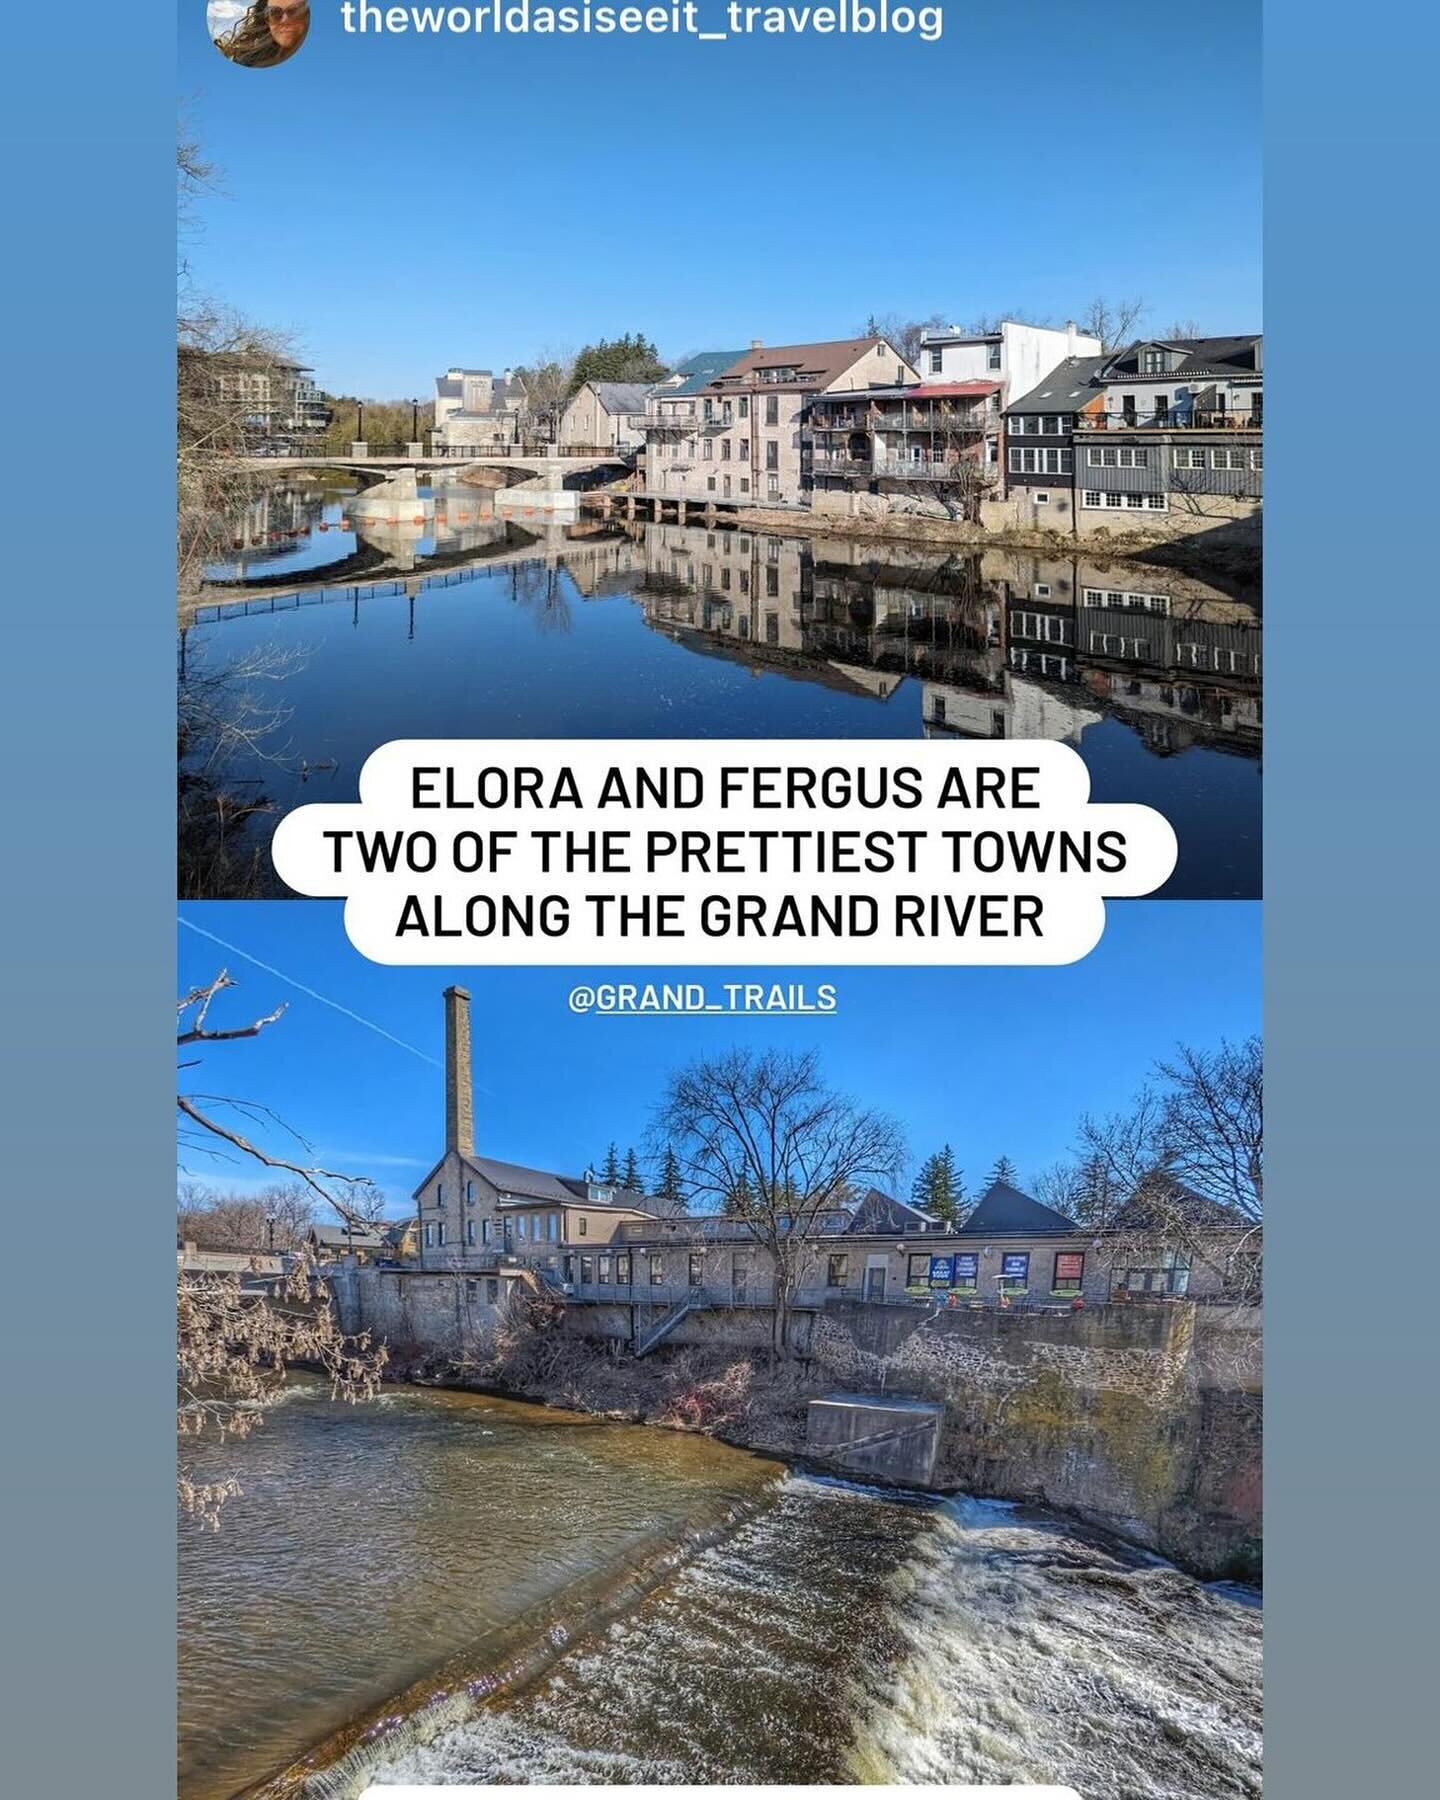 Did you know you can access FREE, family-friendly itineraries on the #GrandTrails website? 🤩

Check out the Elora-Fergus Cataract Trail Bike Ride itinerary in the Elora/Fergus highlight! Thanks to @theworldasiseeit_travelblog, you can see first hand